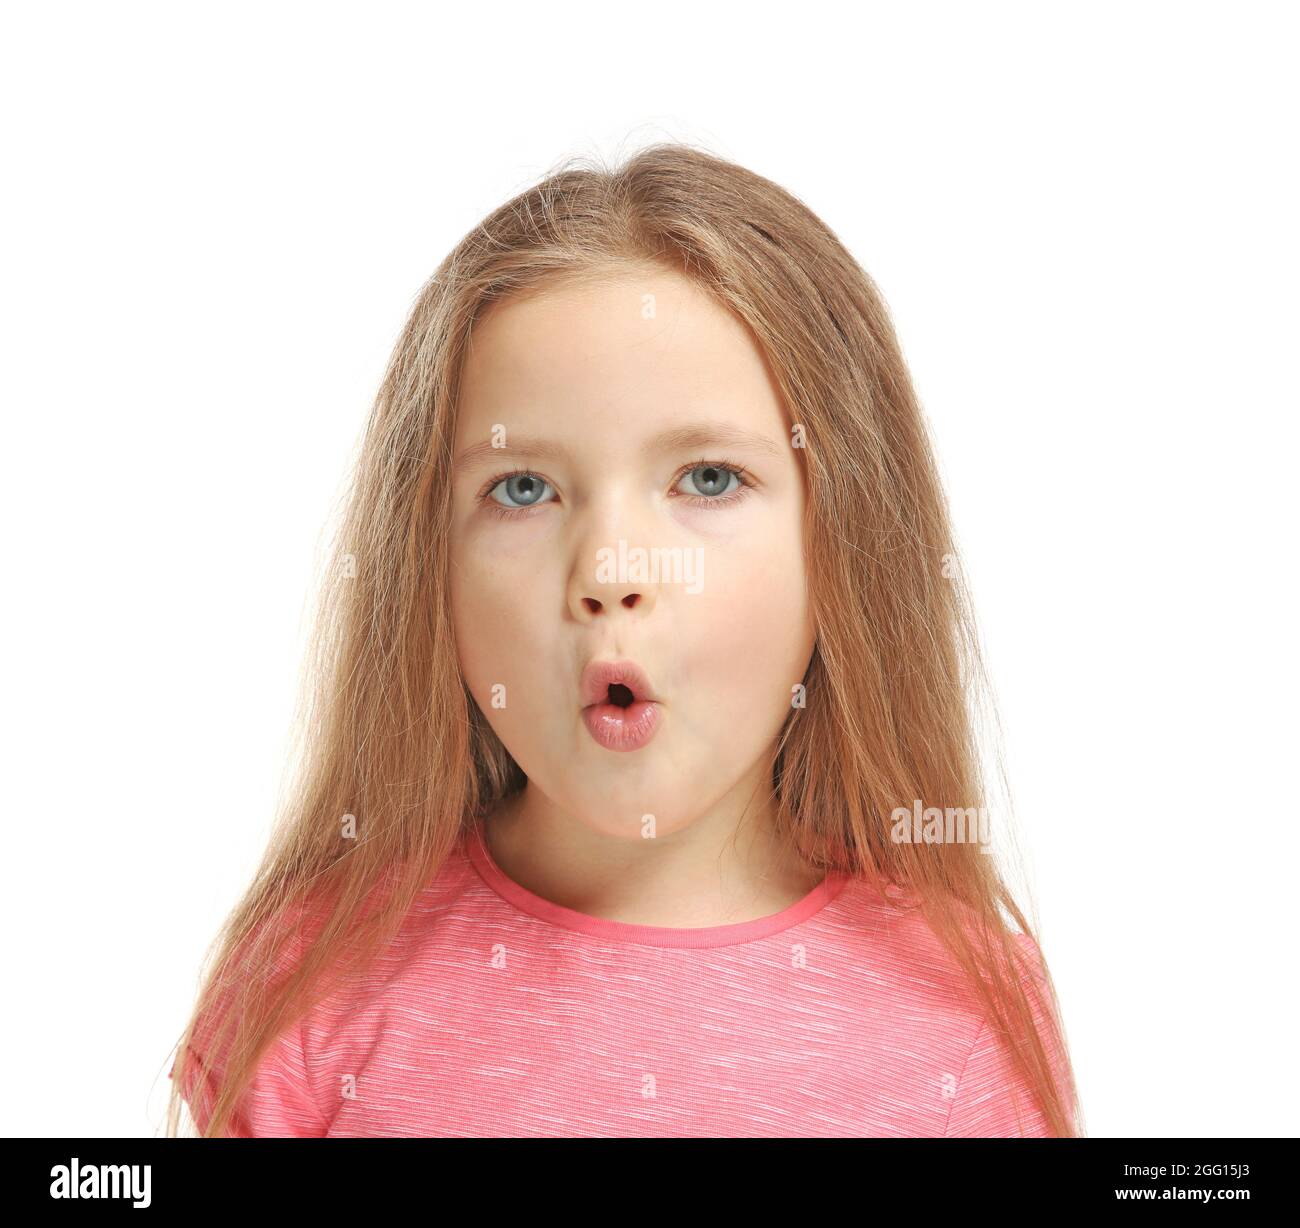 Little girl training pronounce letters on white background Stock Photo -  Alamy